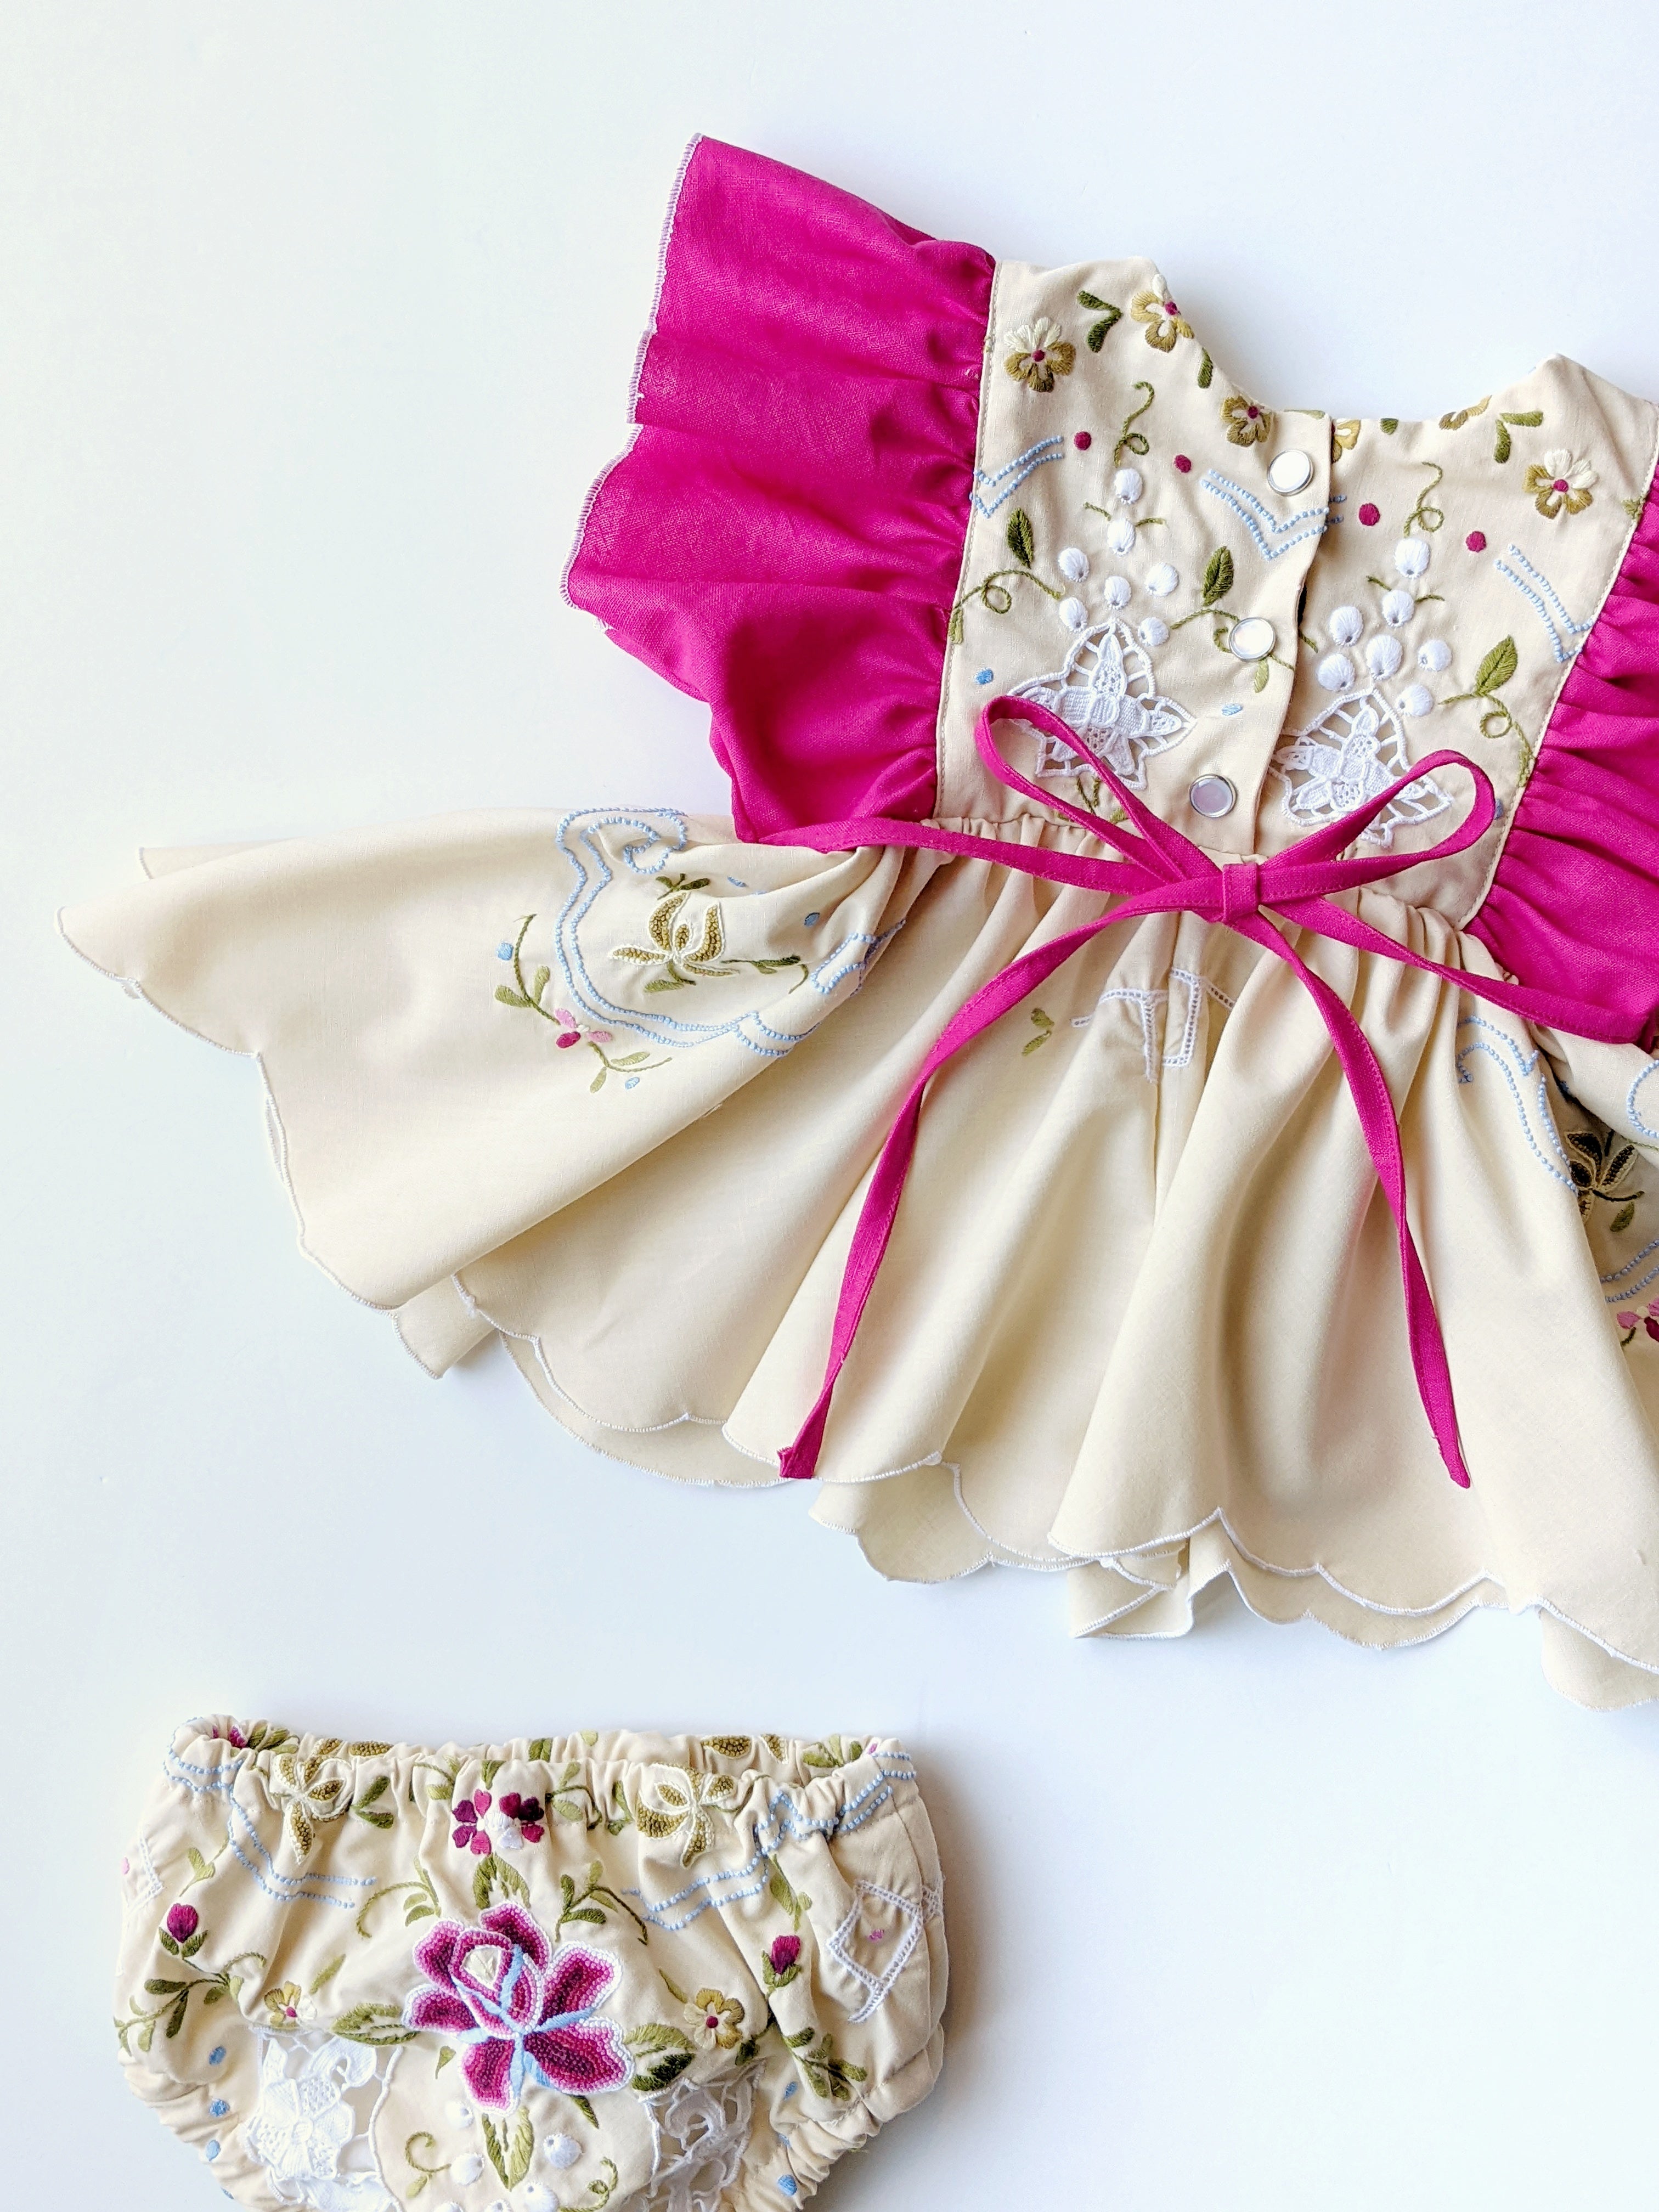 "Camellia" style dress + bloomers set - Size 6/12 months